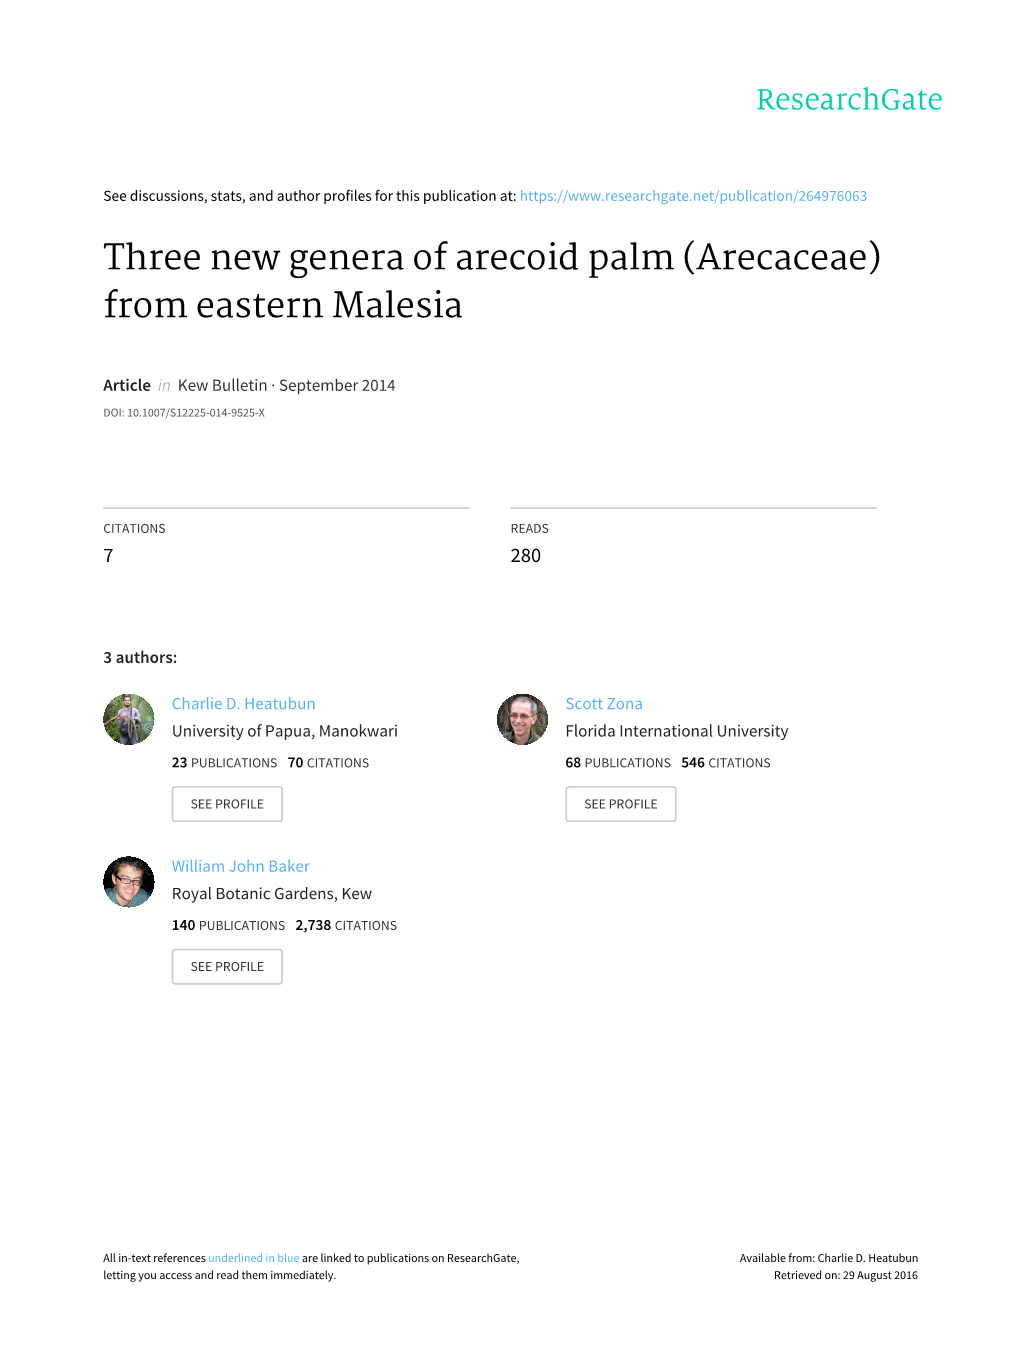 Three New Genera of Arecoid Palm (Arecaceae) from Eastern Malesia